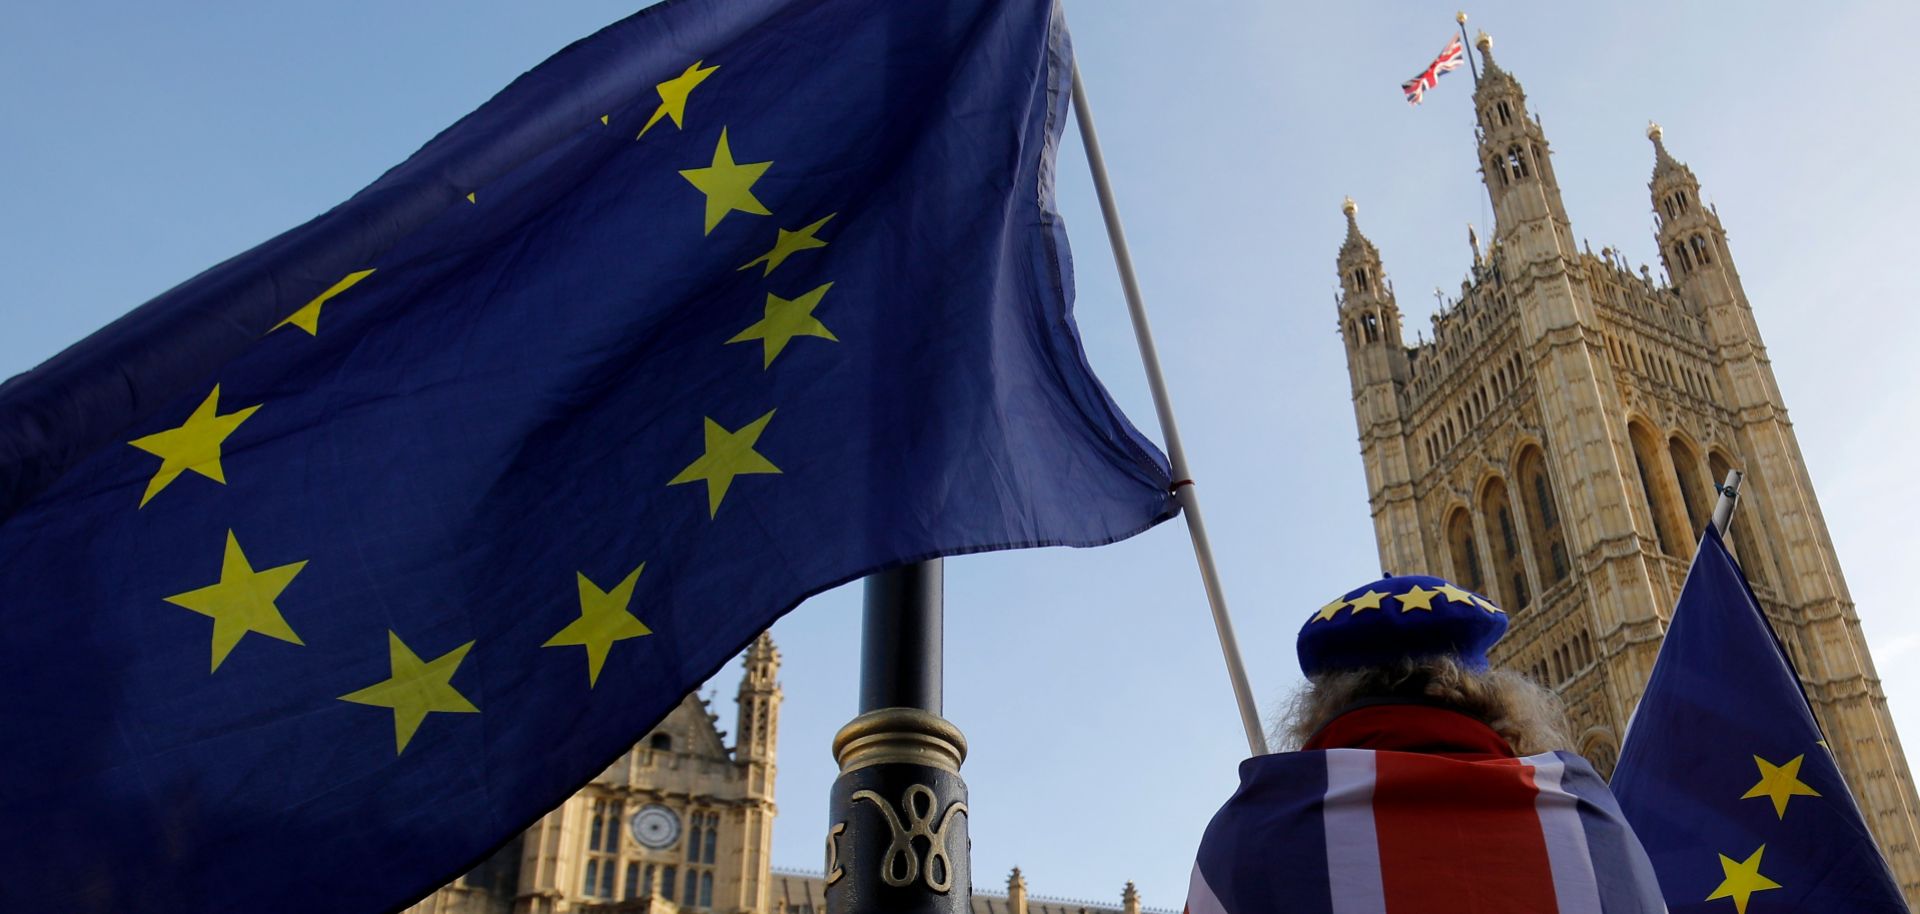 A Brexit opponent displays the Union Jack and the European Union flag outside the Houses of Parliament in London on Dec. 17, 2018.